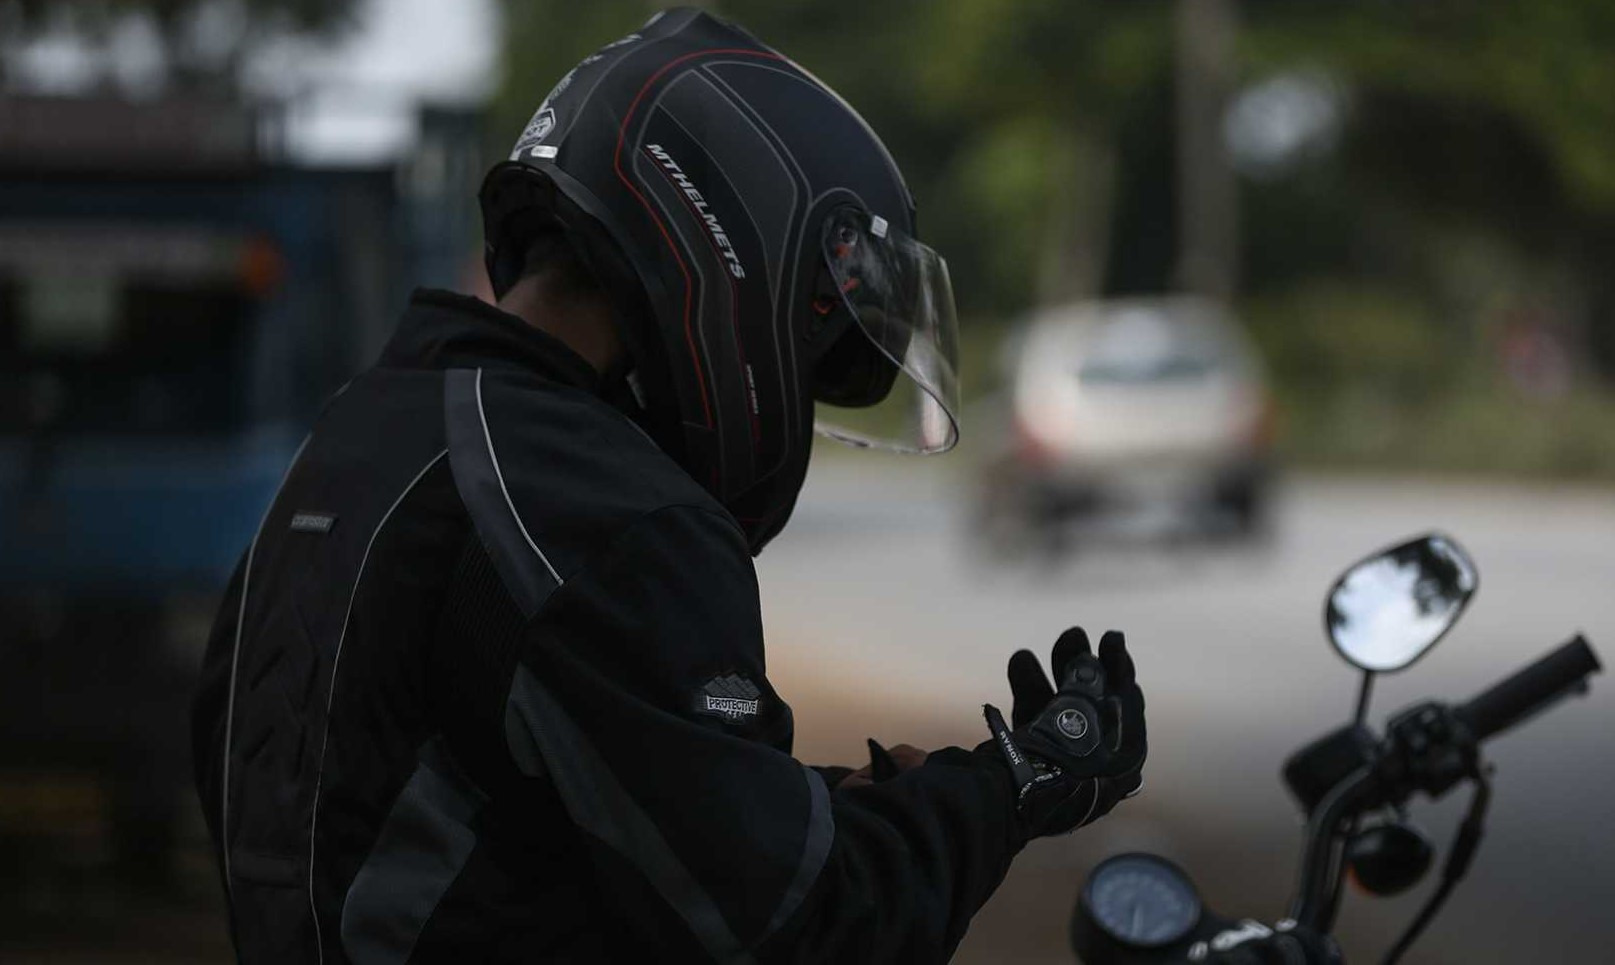 Disinfection of your motorcycle helmet and gloves